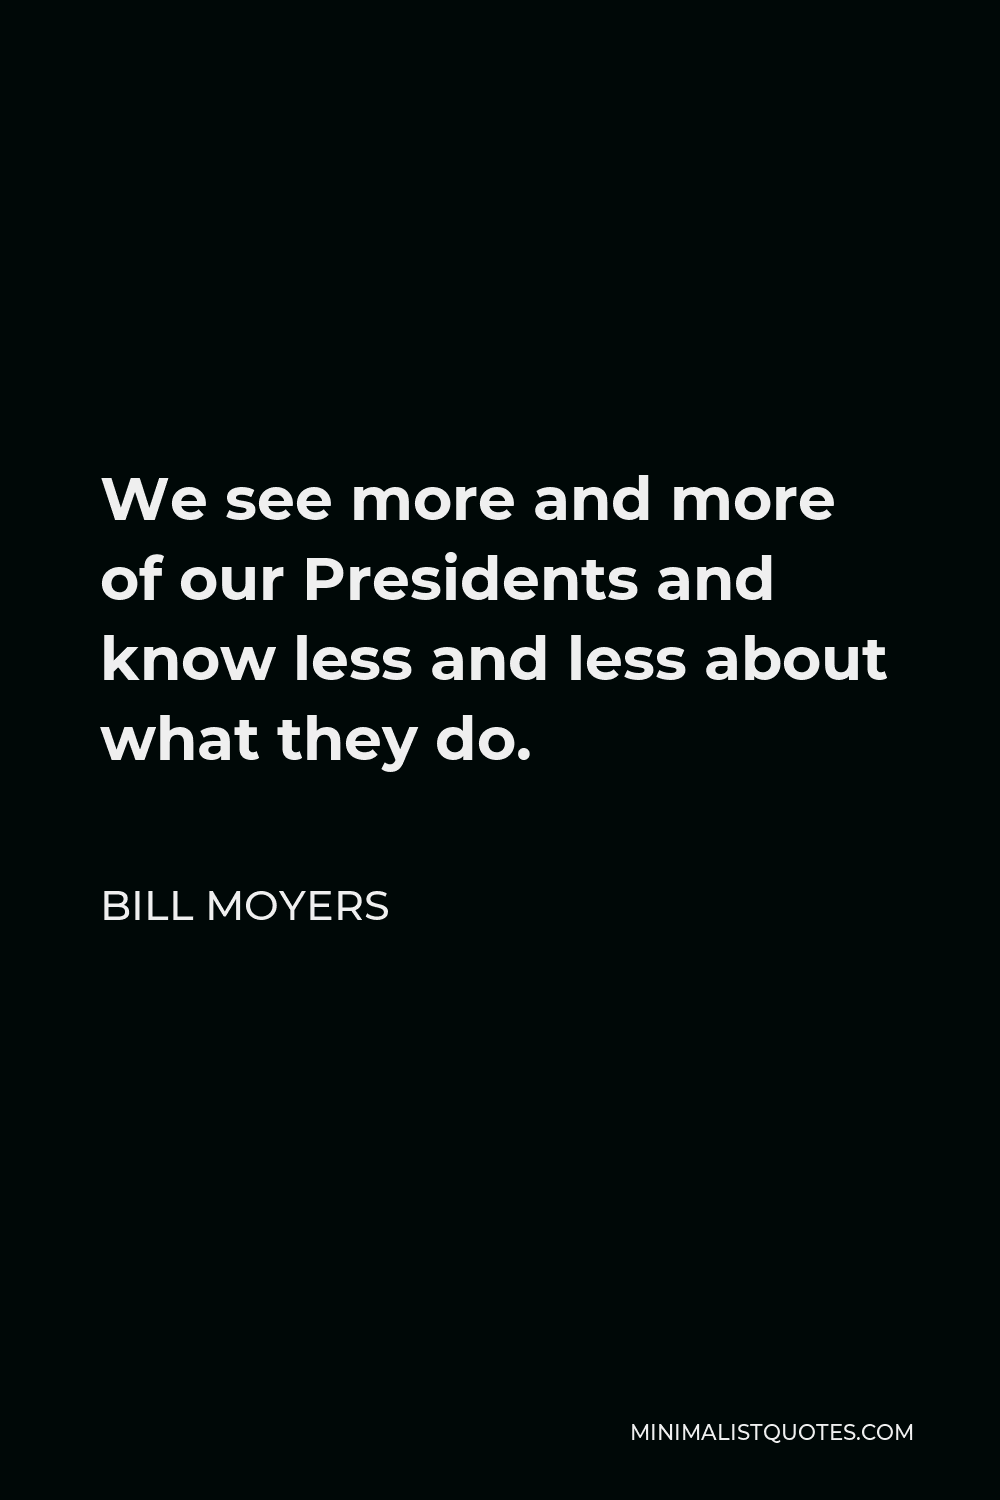 Bill Moyers Quote - We see more and more of our Presidents and know less and less about what they do.